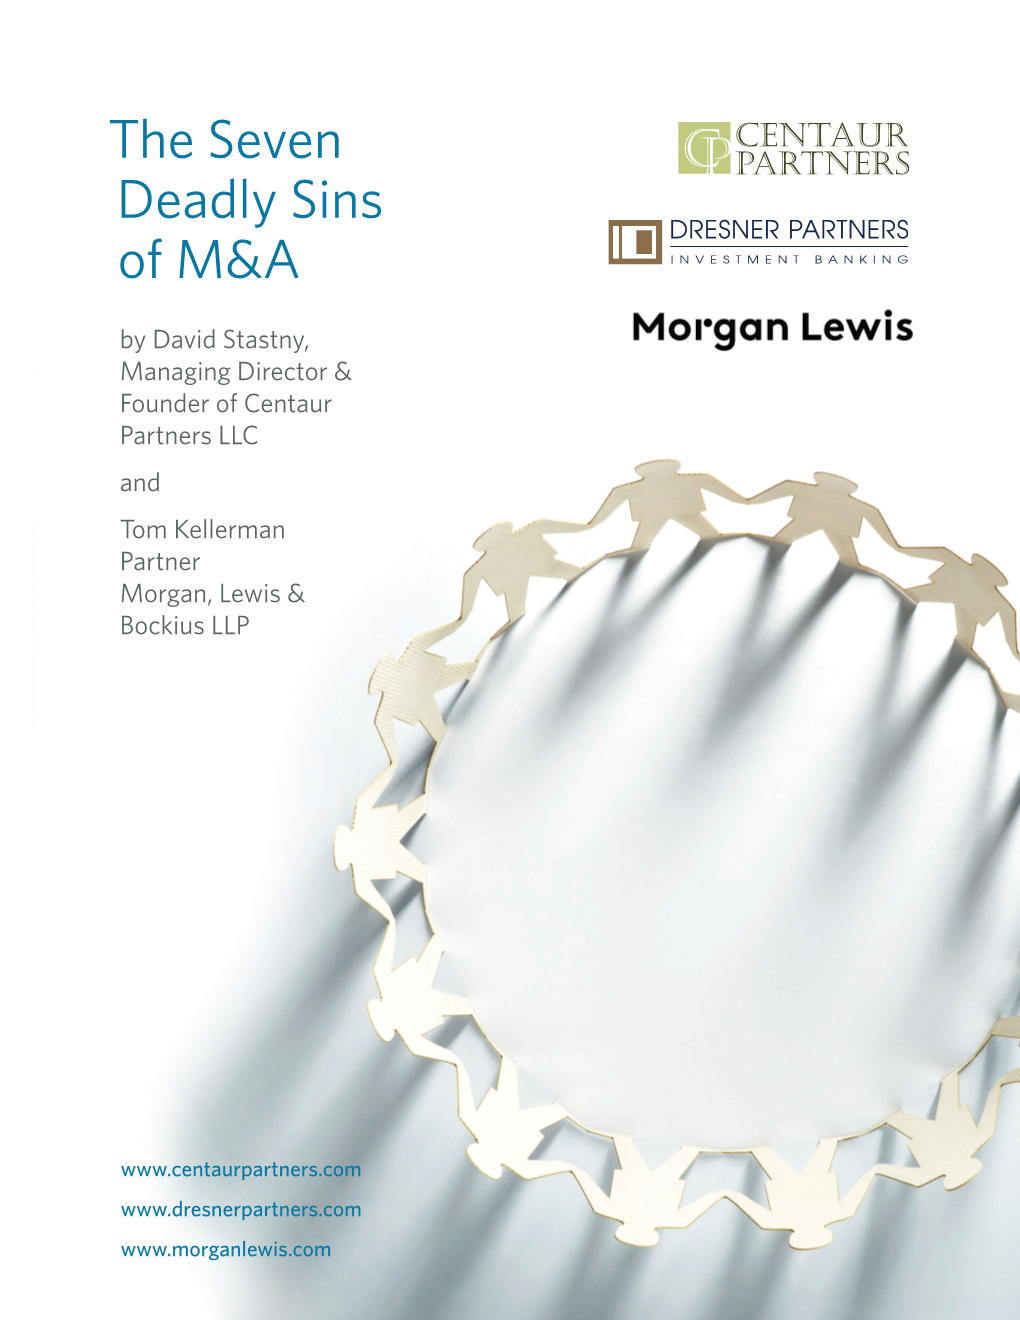 The Seven Deadly Sins of M&A